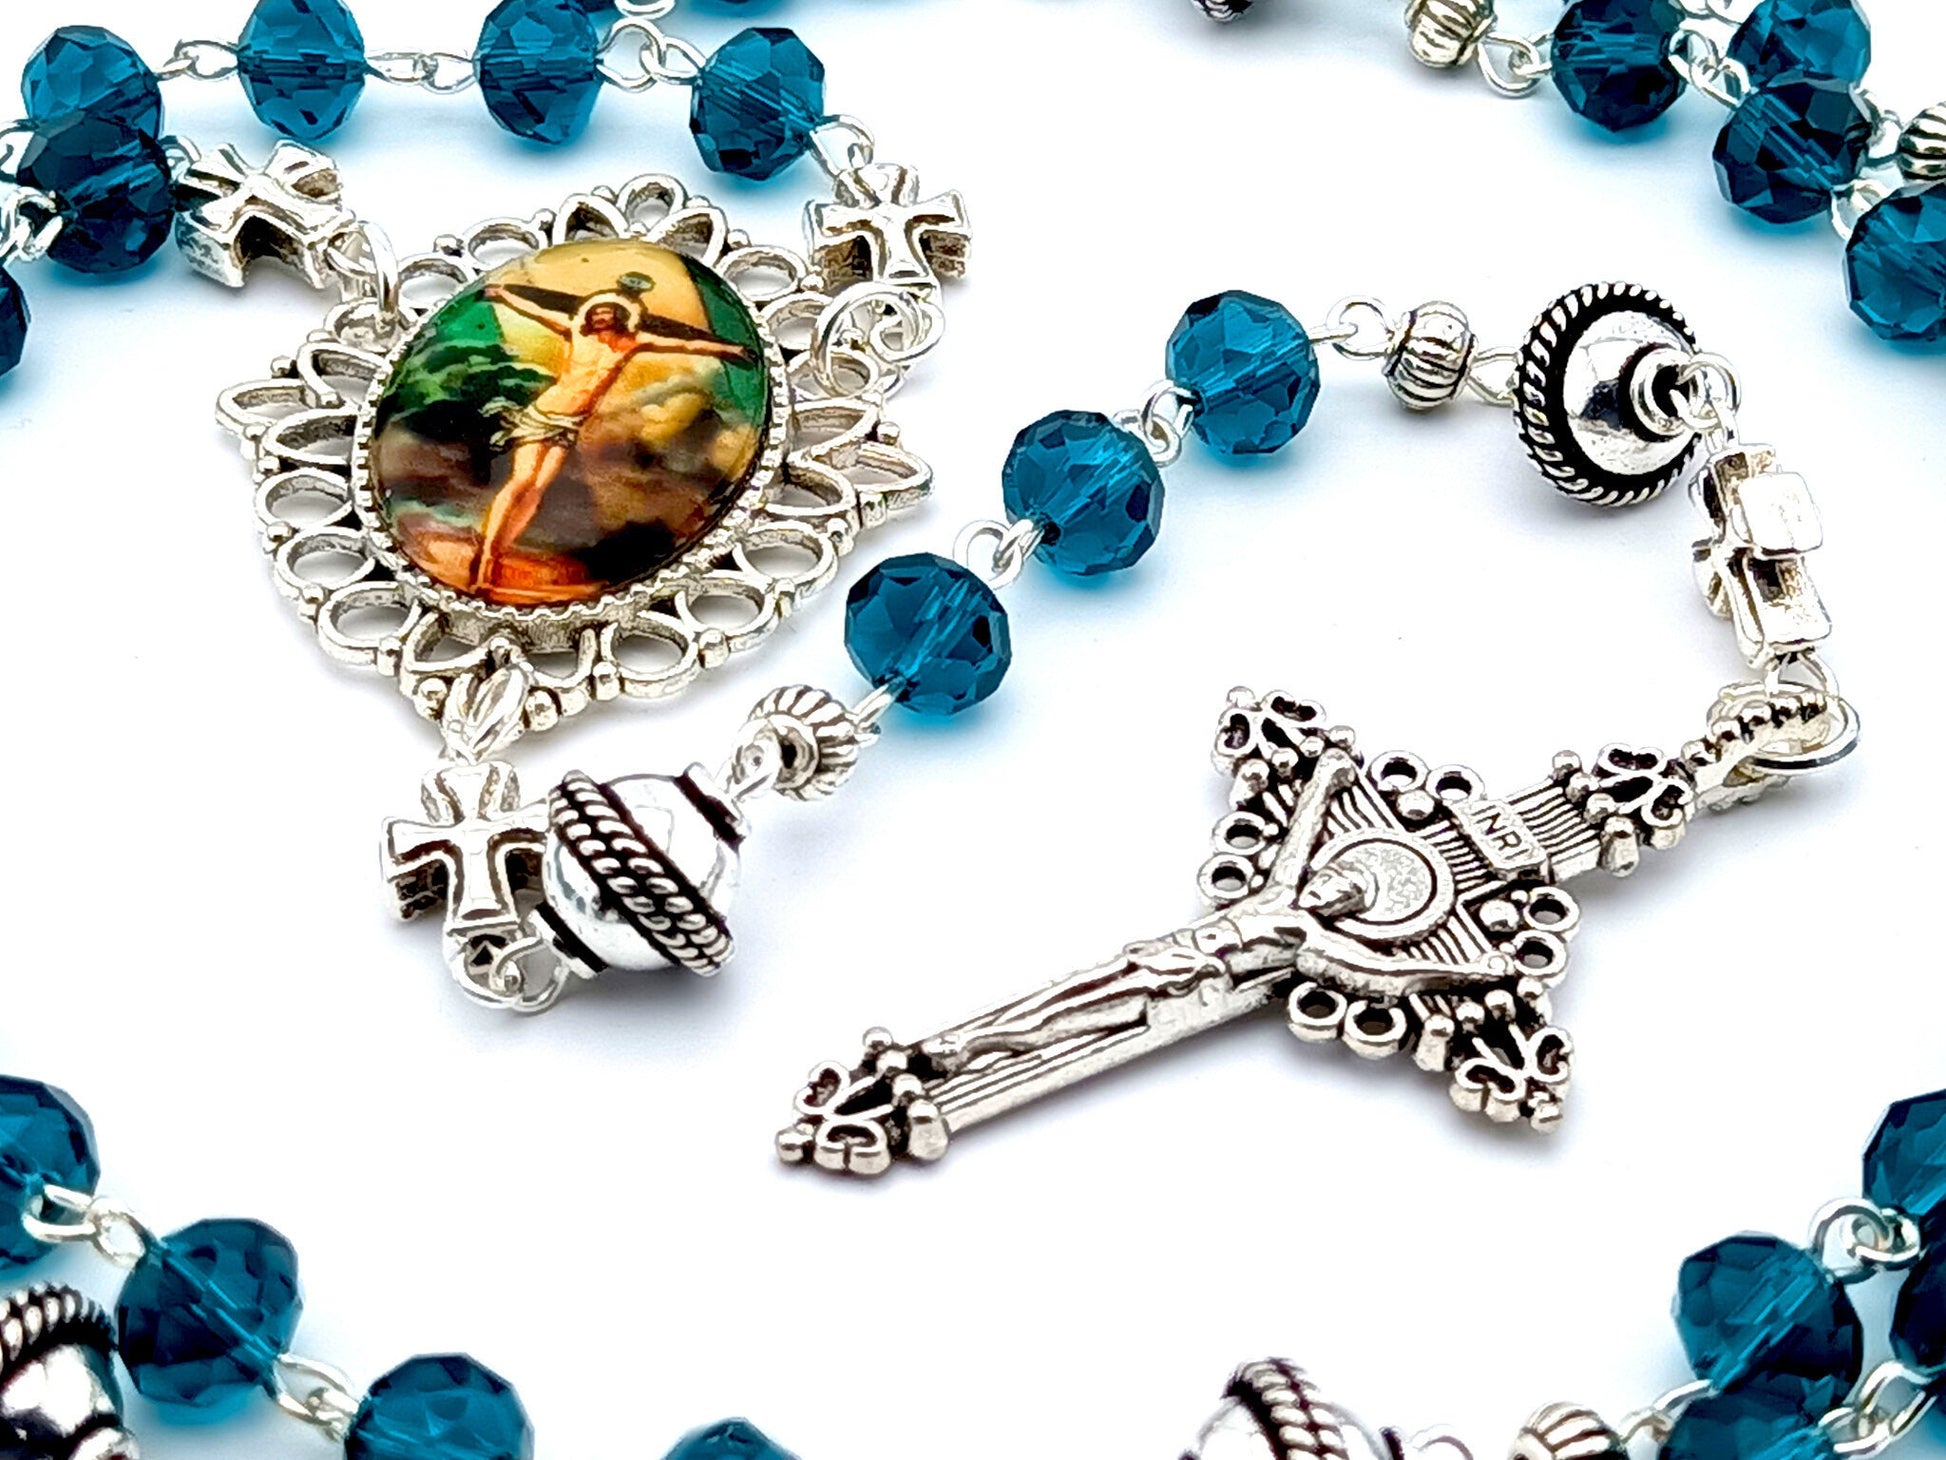 The Crucifixion unique rosary beads with blue faceted glass and silver beads, silver crucifix and picture centre medal.